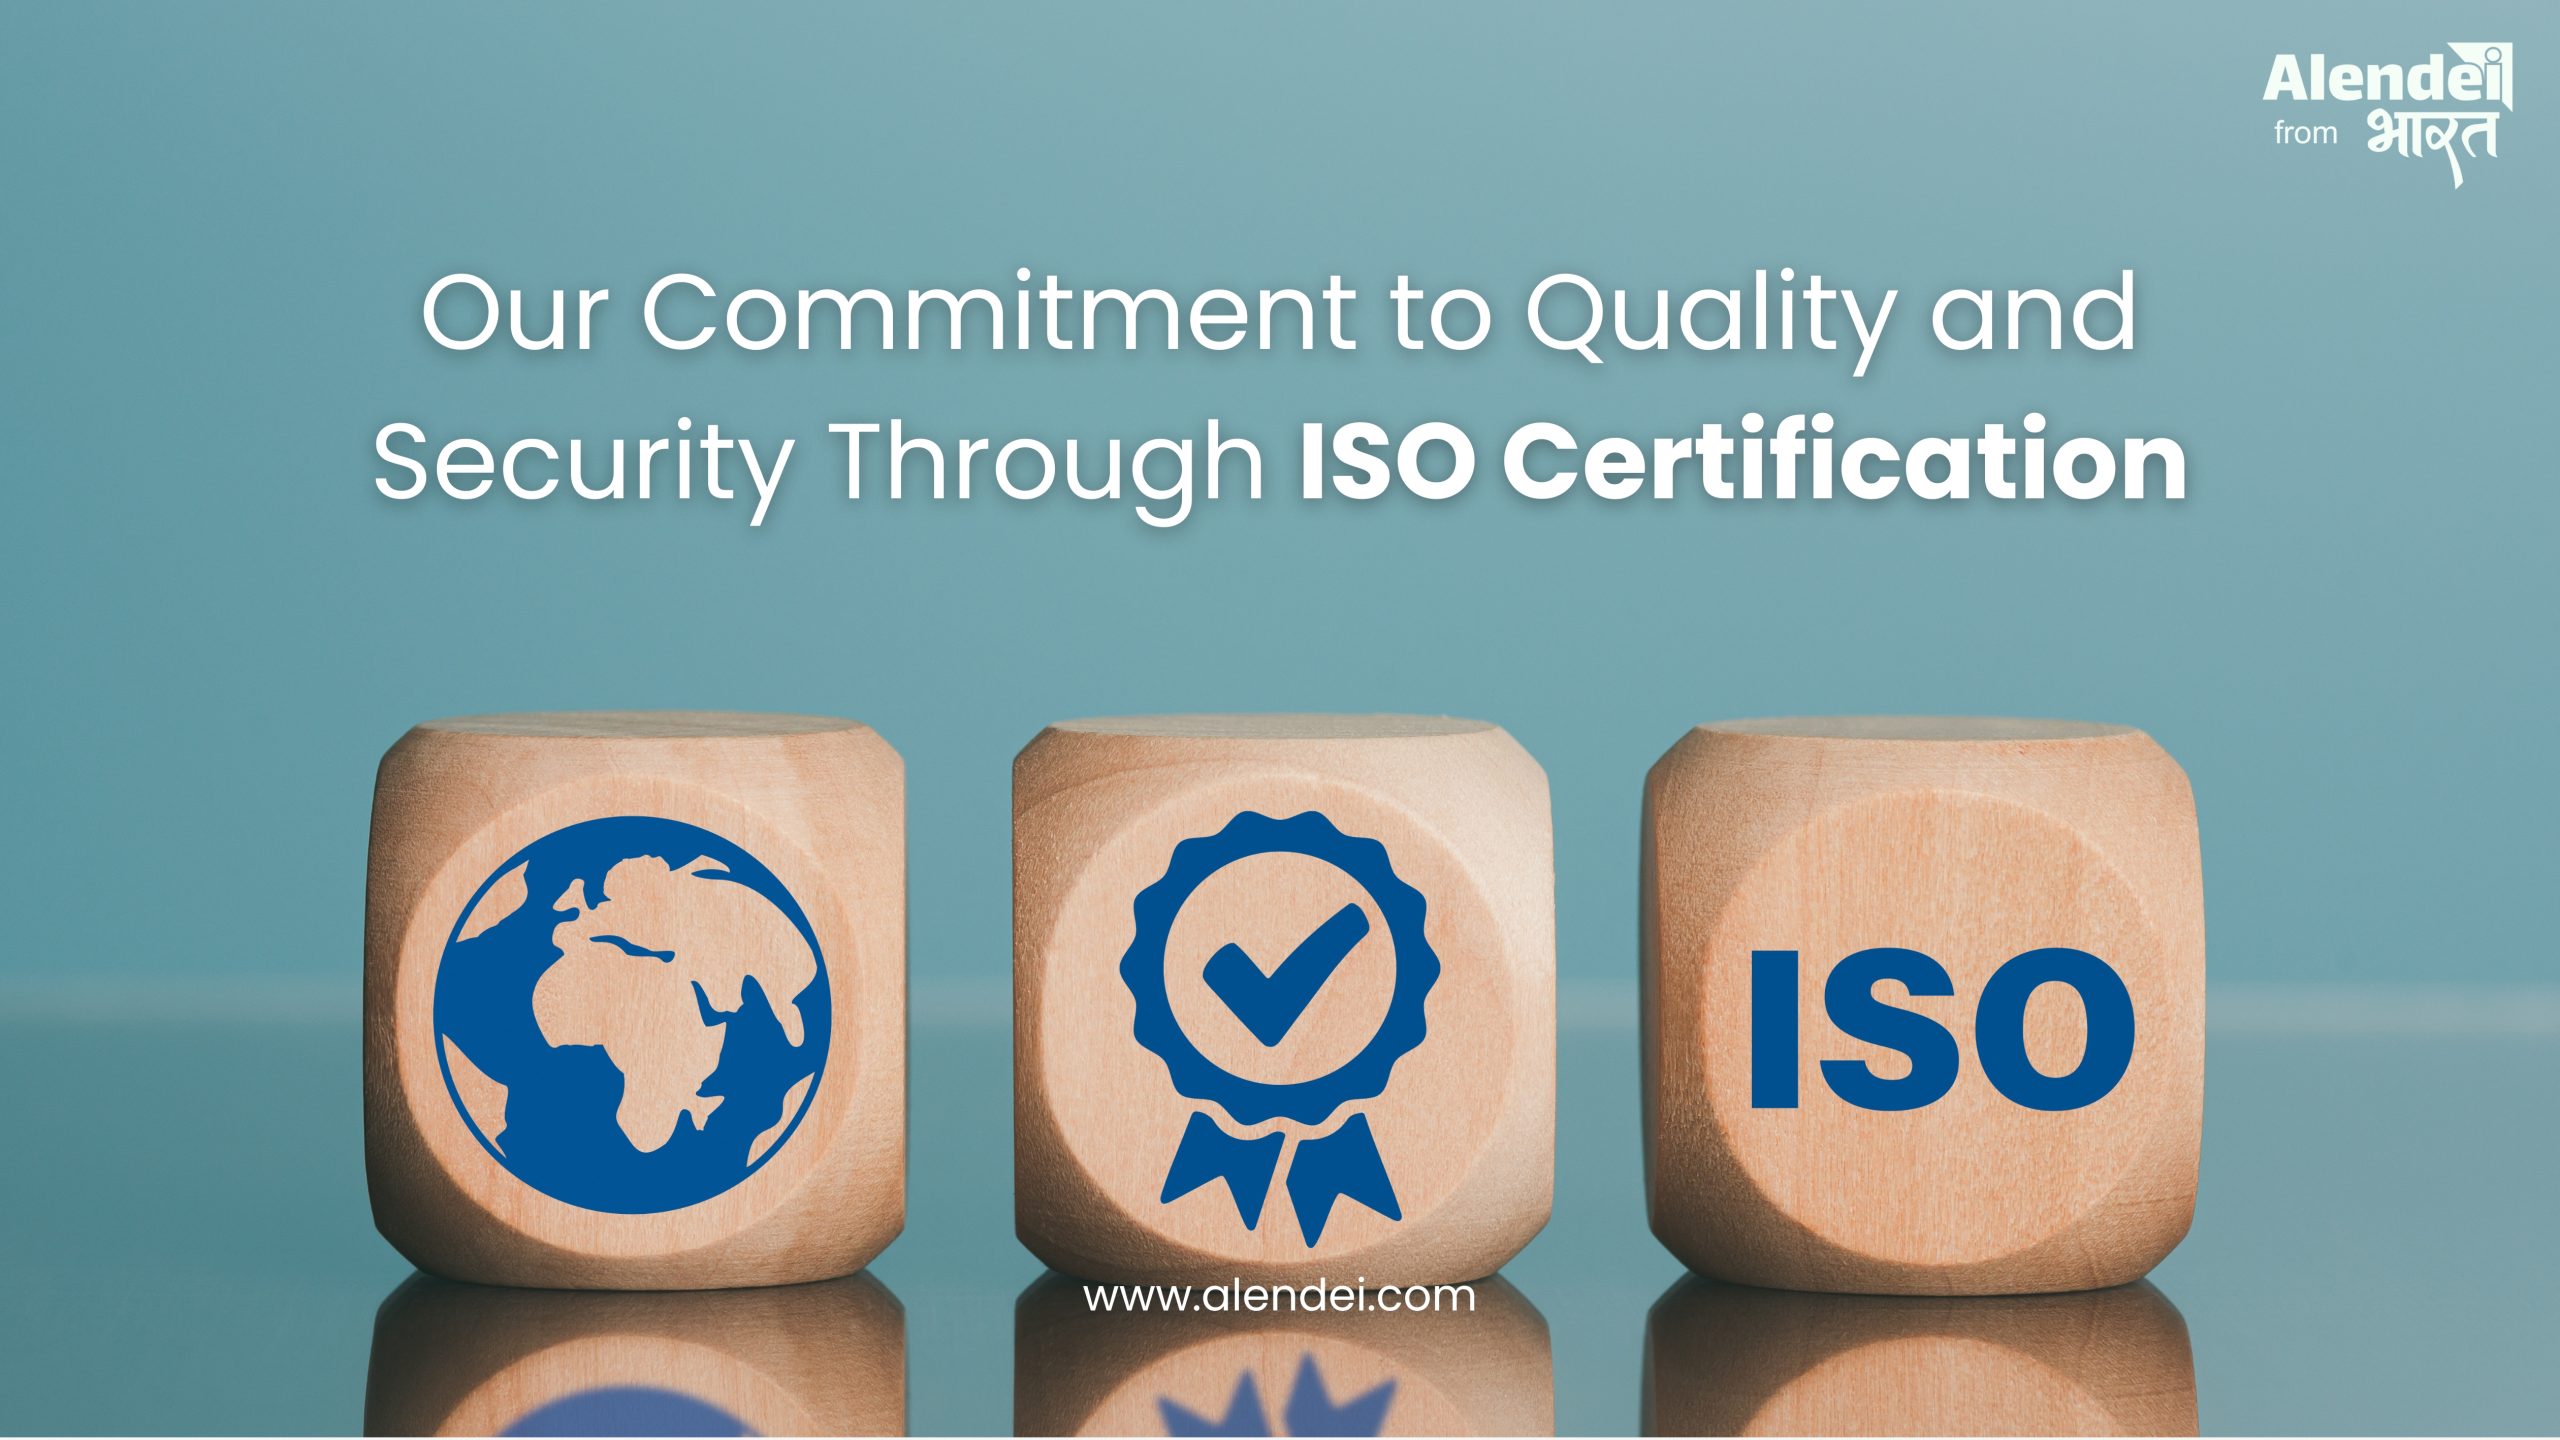 Alendei's Commitment to Quality and Security Through ISO Certification